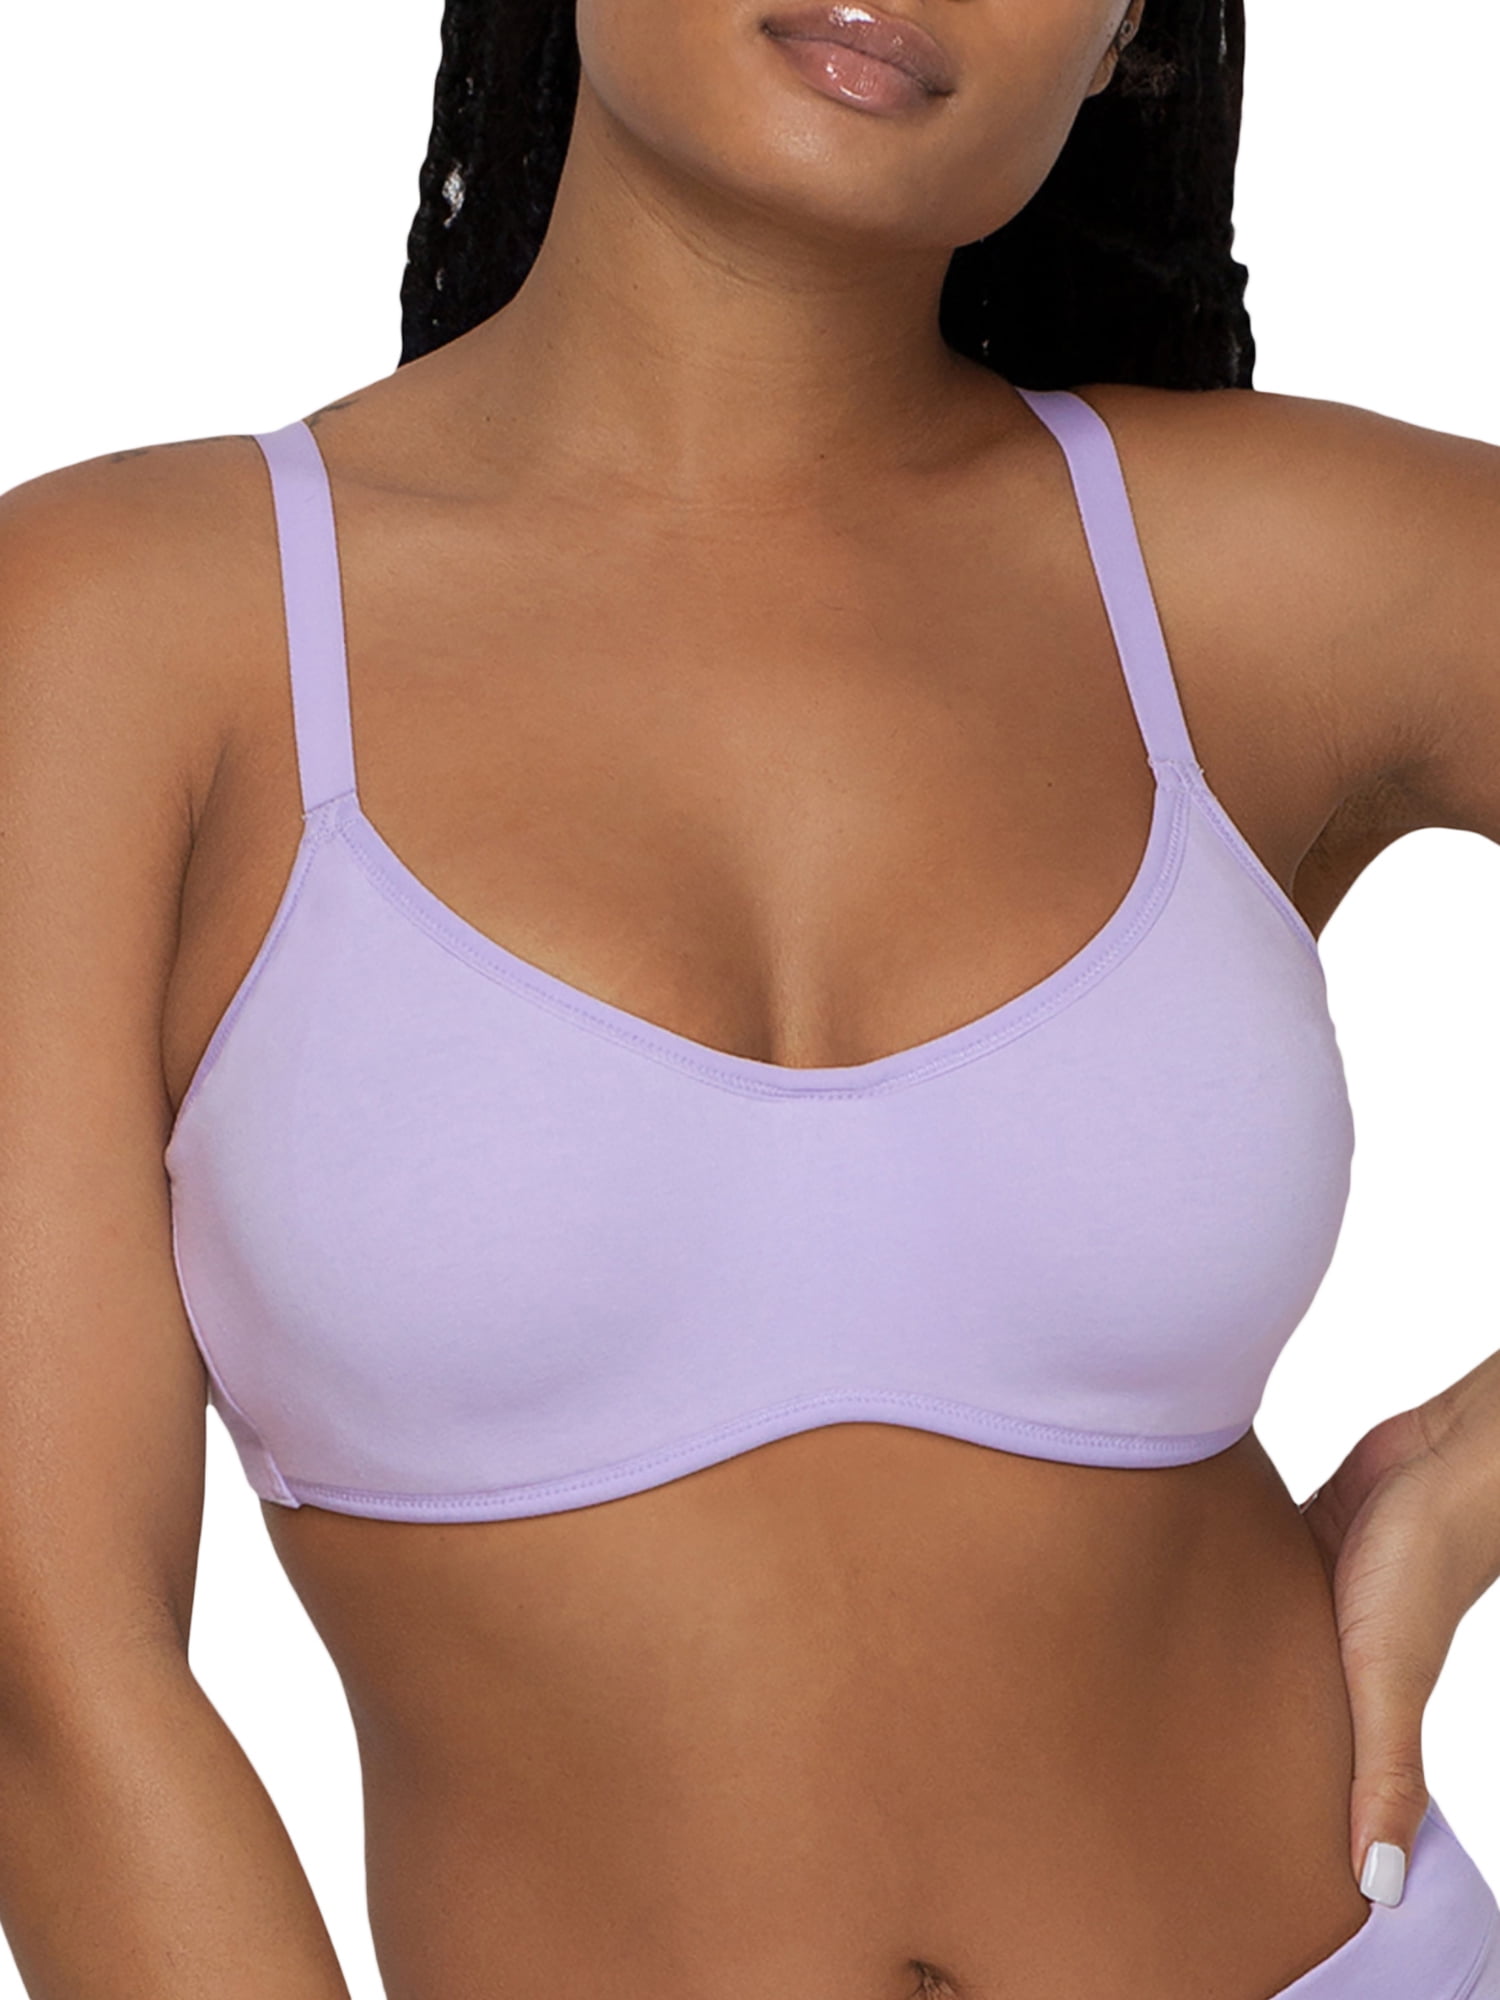 Cotton 36d White Bralette Bra - Get Best Price from Manufacturers &  Suppliers in India